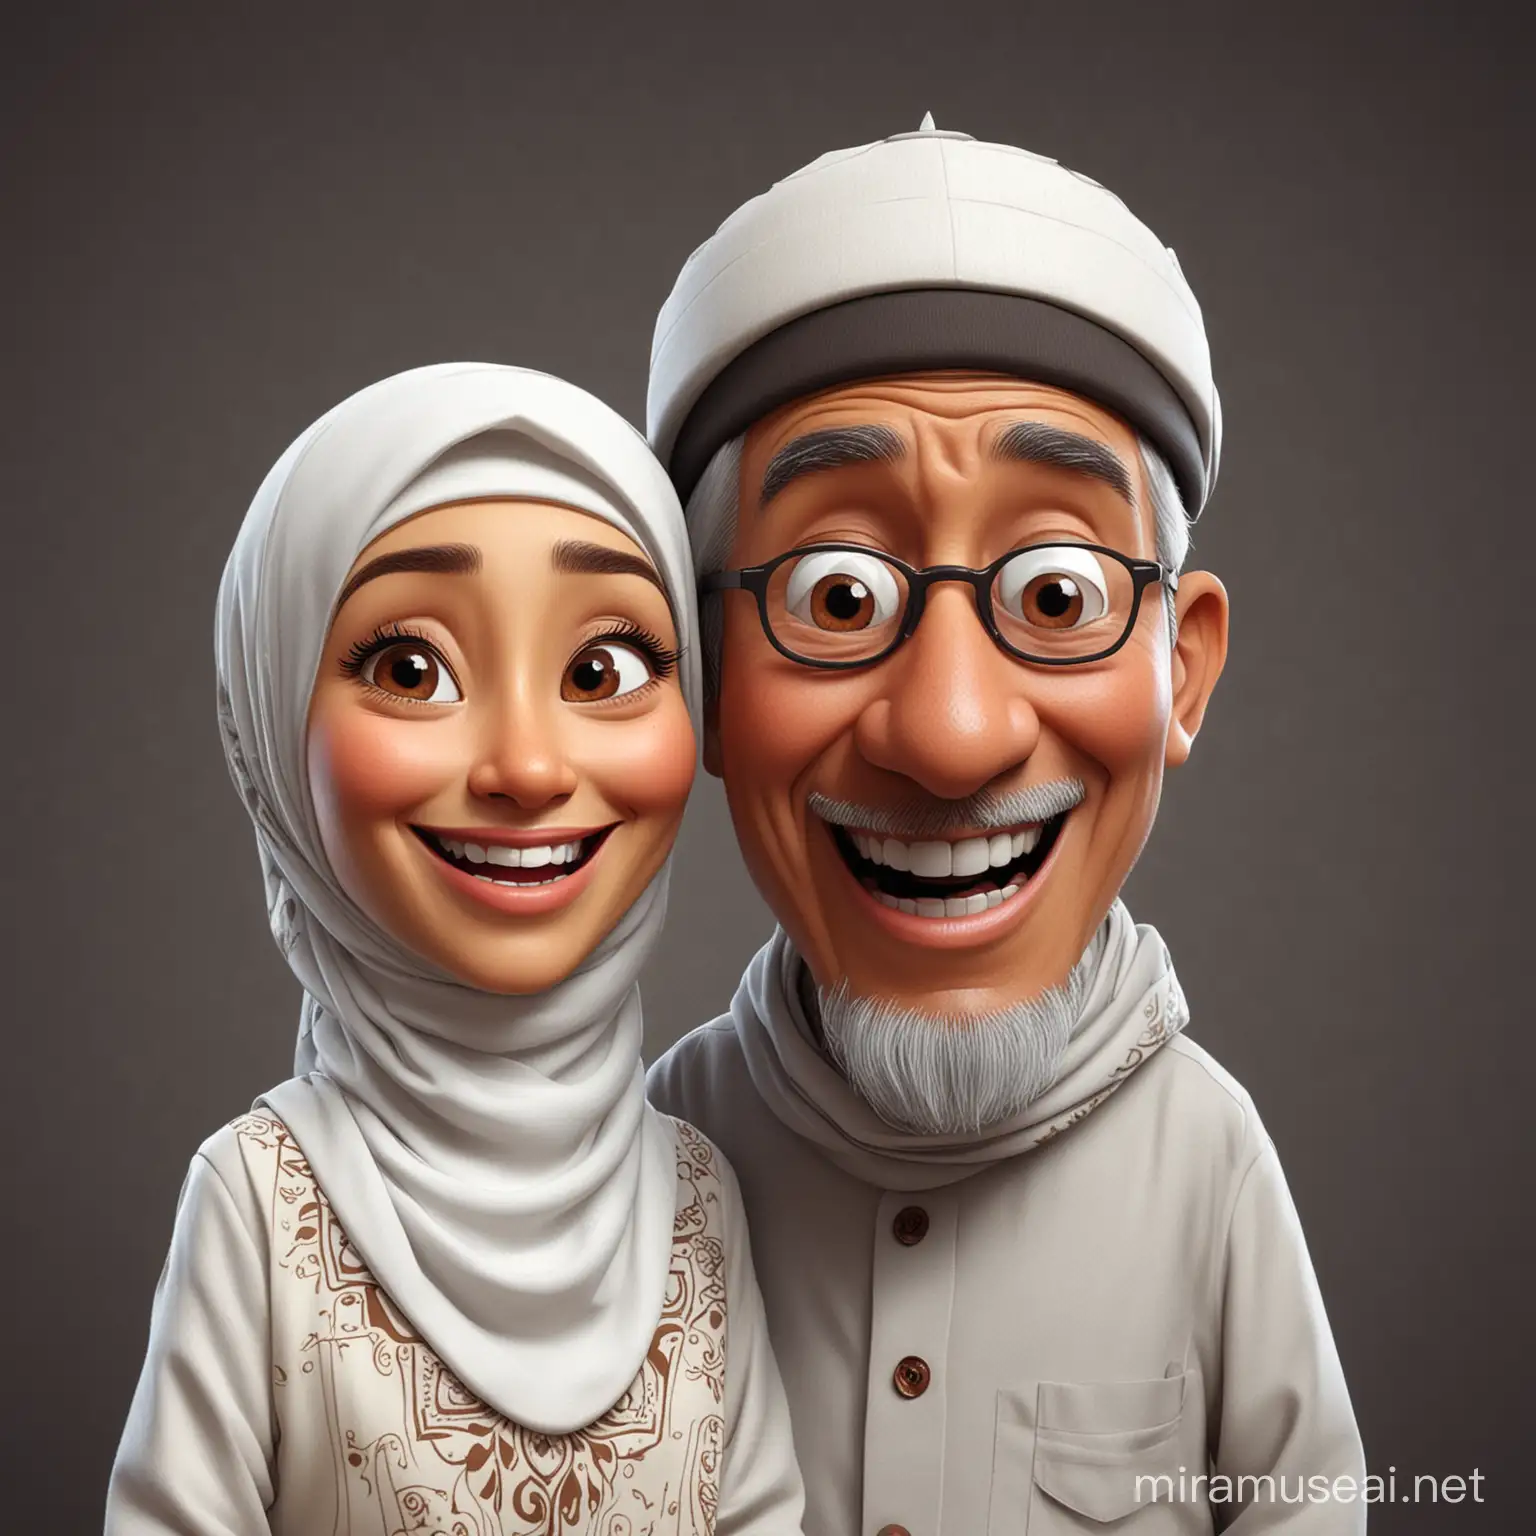 Elderly Indonesian Couple in Playful Expressions Pixar Style Cartoon Illustration